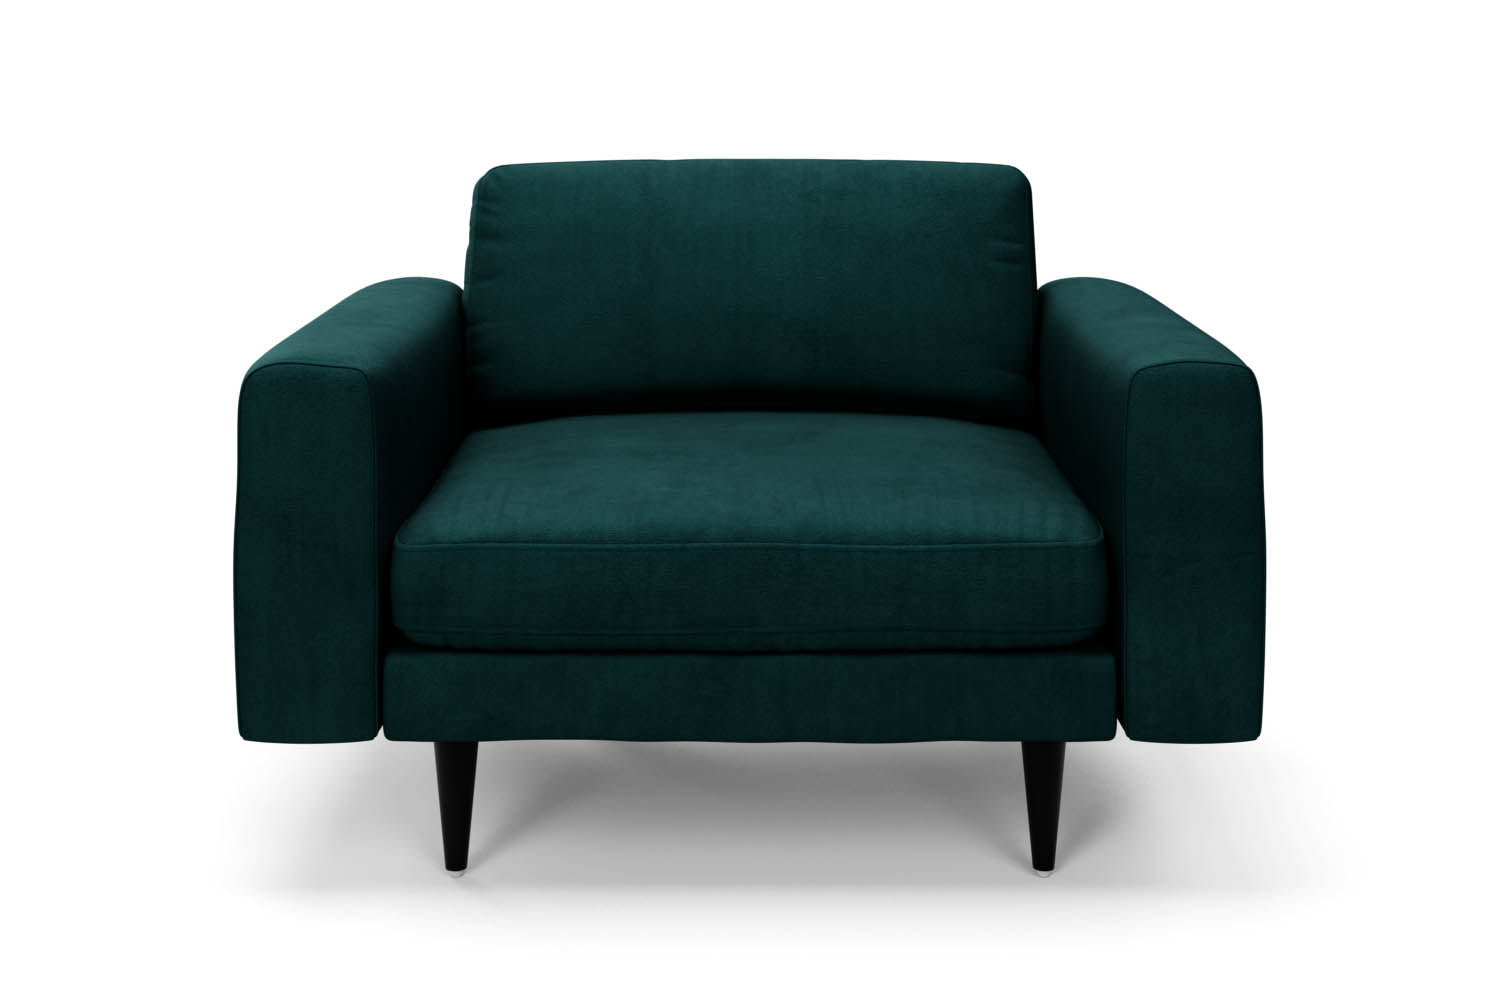 SNUG | The Big Chill 1.5 Seater Snuggler in Pine Green variant_40837198250032